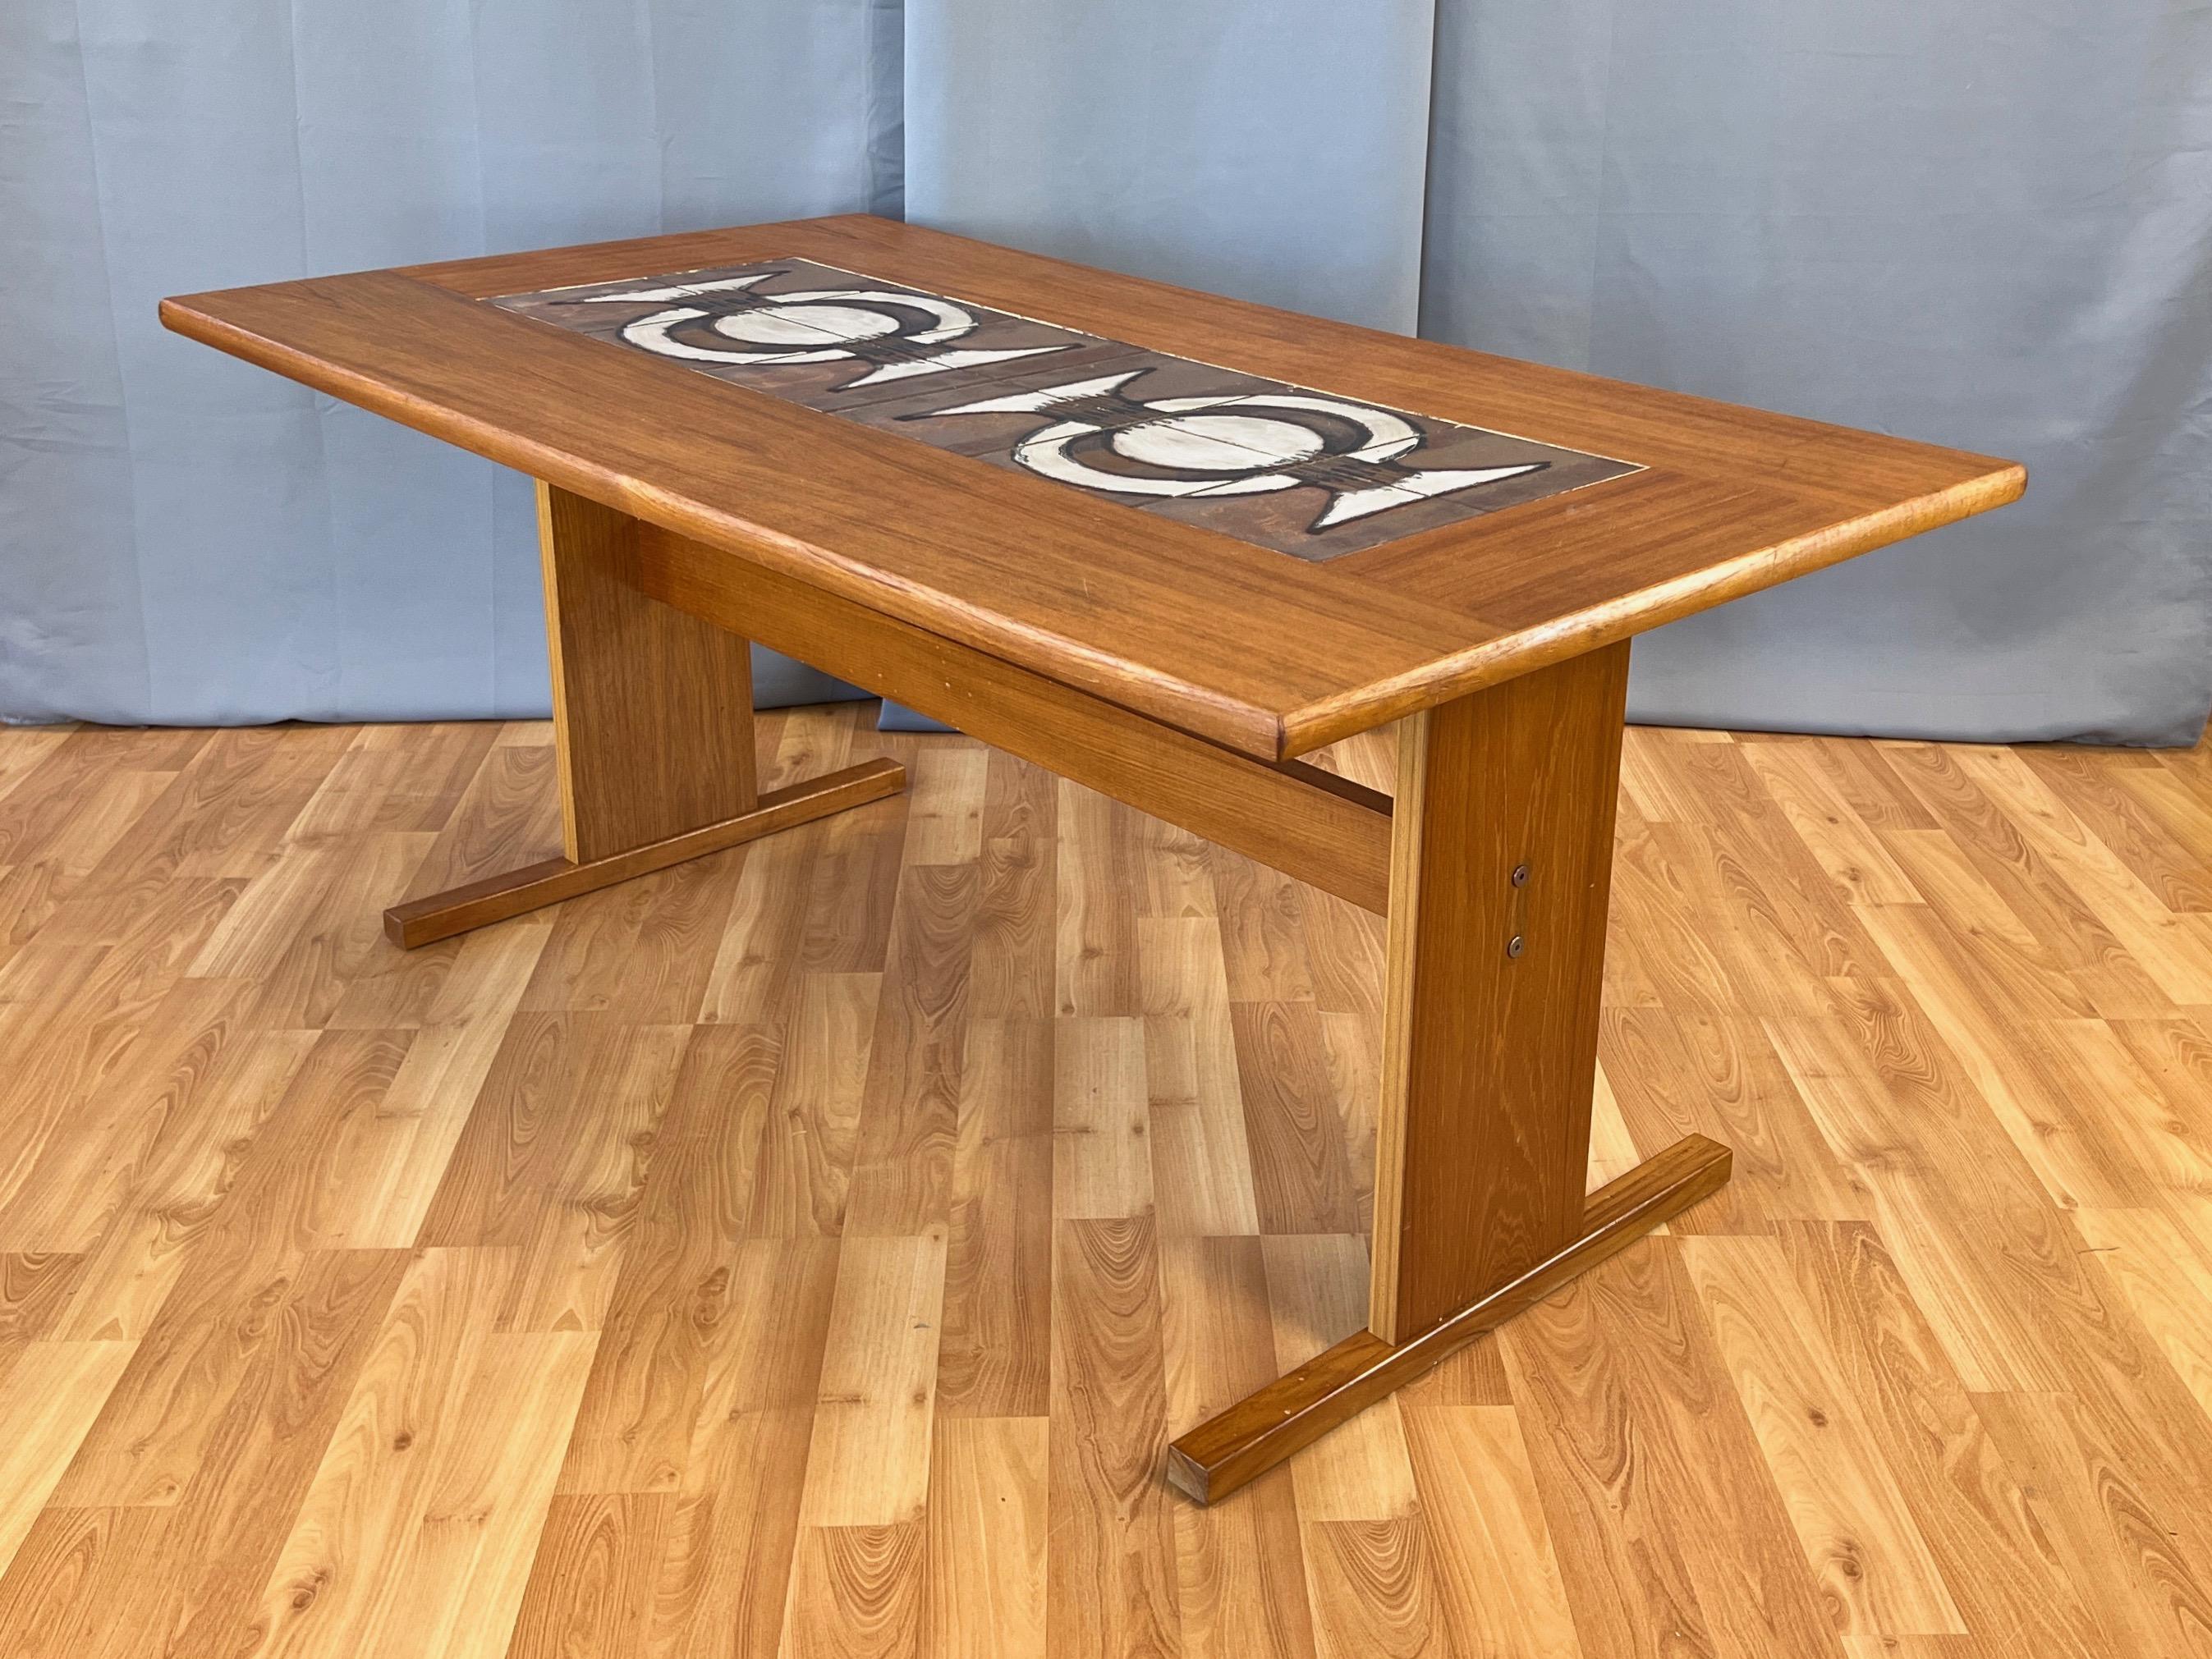 A very handsome 1970s Danish teak dining table by Gangsø Møbler with ceramic art tile top by Poul Hermann Poulsen. 

Bookmatched teak with a distinctive linear grain pattern runs the length of the rounded-edge top, with perpendicularly-aligned